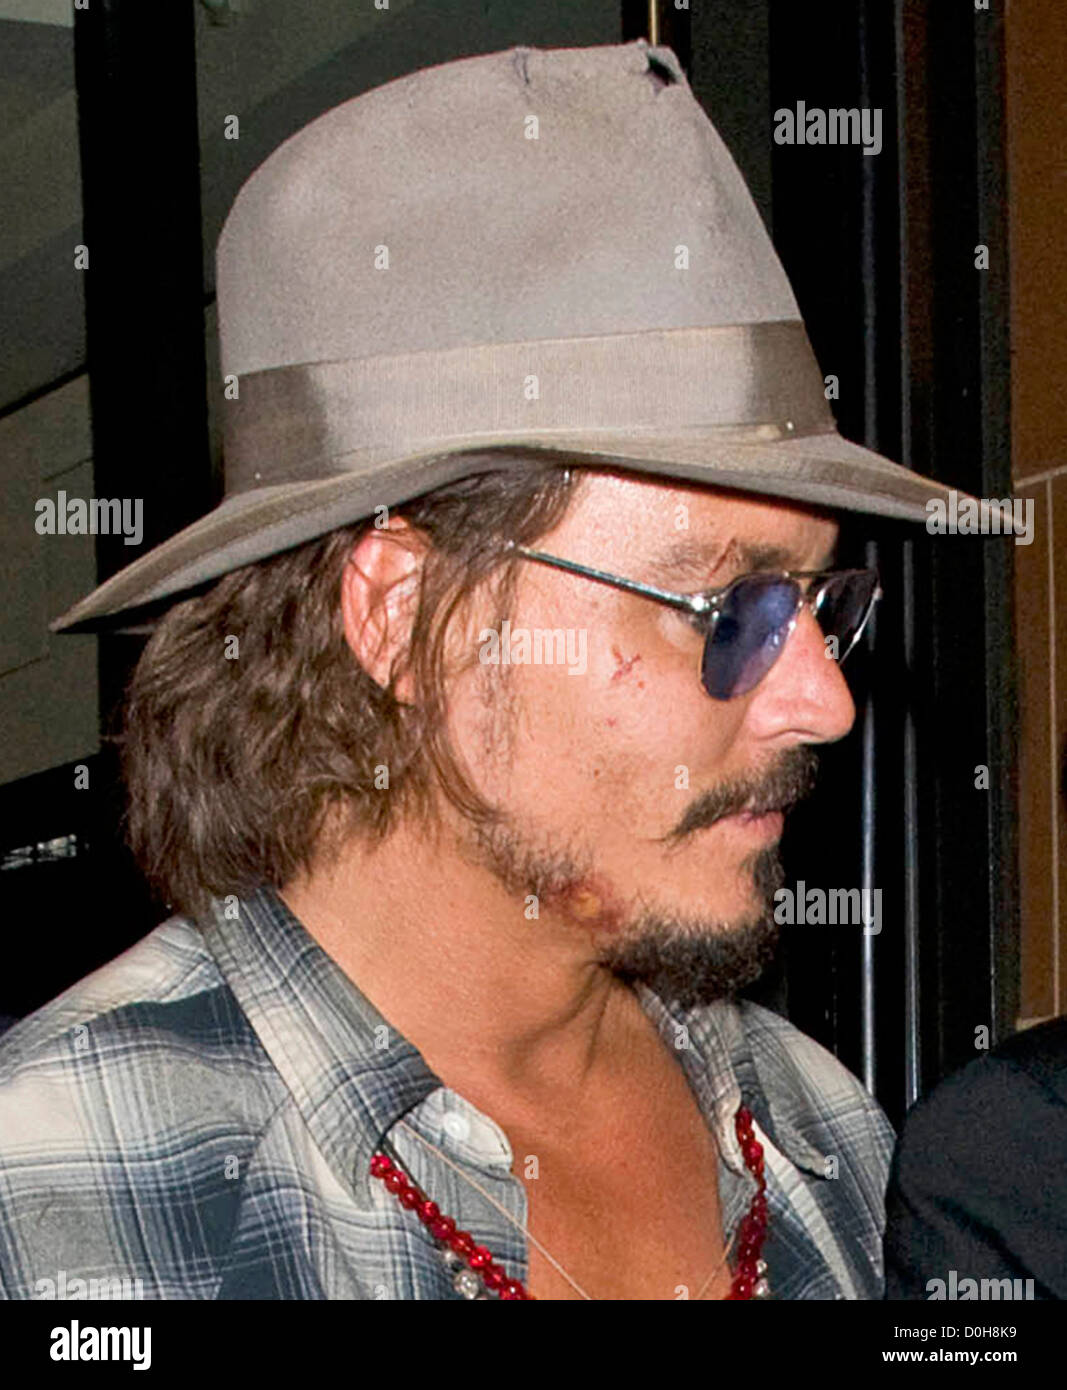 Johnny Depp, wearing a fedora hat and sunglasses, leaving 'C London'  restaurant. Depp was sporting some cuts on his face, and a Stock Photo -  Alamy